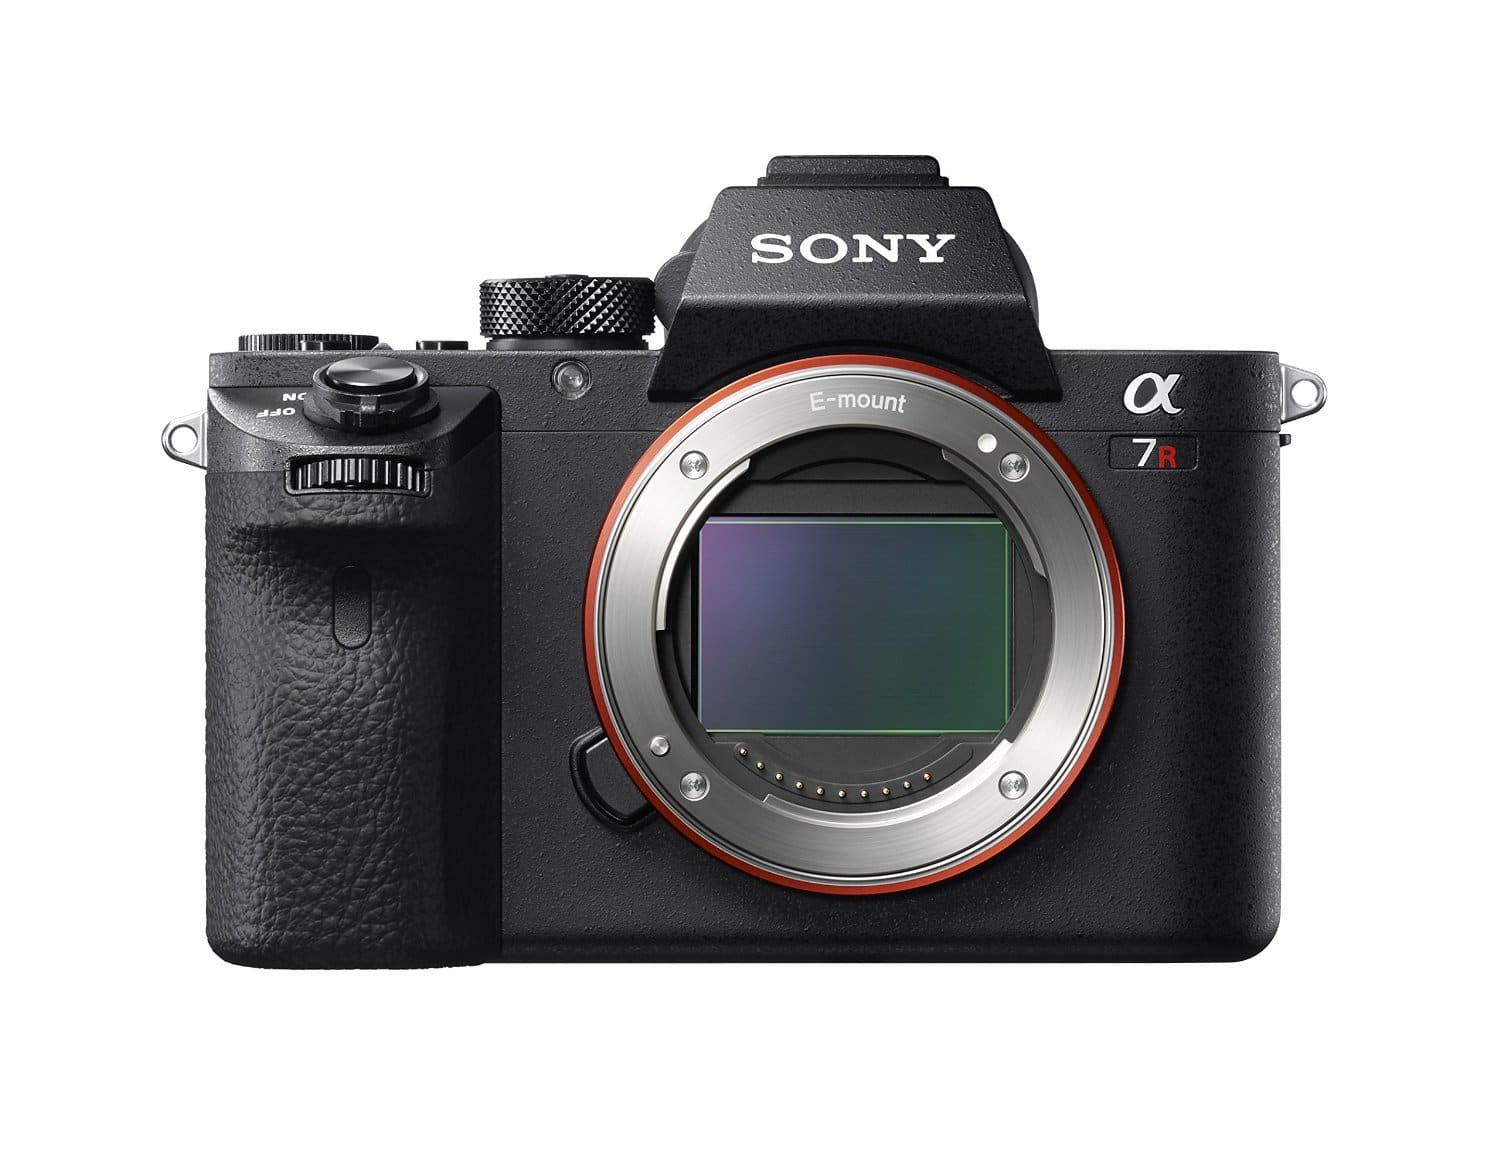 Sony A7RII - The Best Cameras for Travel Bloggers & Travelers